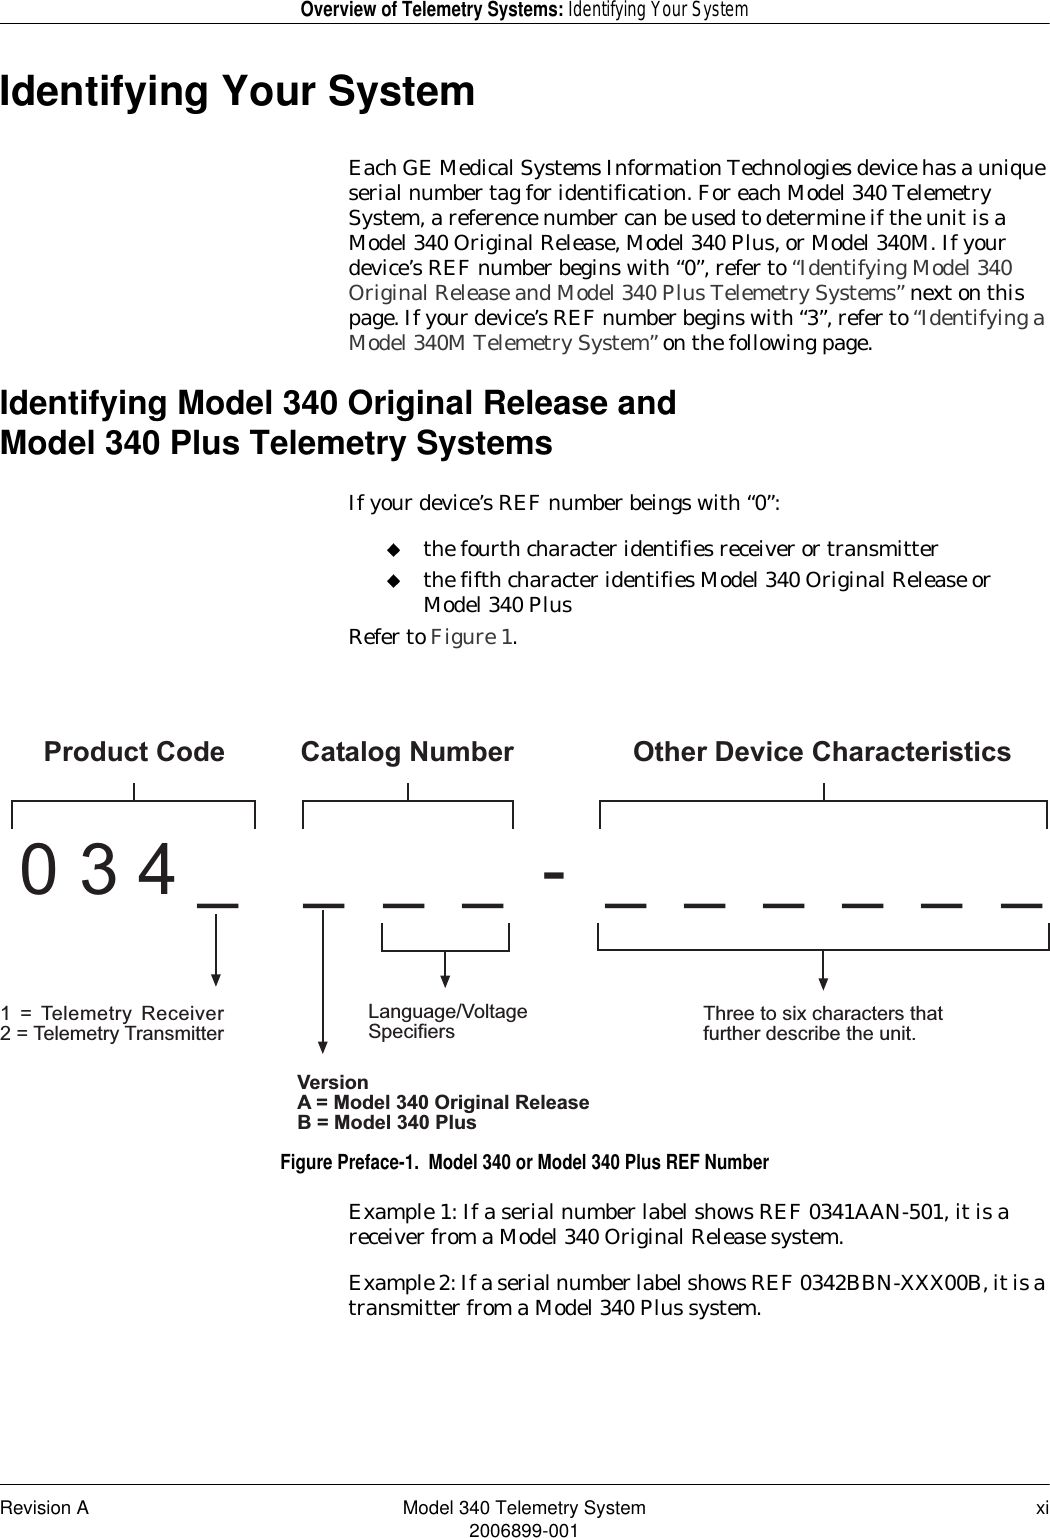 Revision A Model 340 Telemetry System xi2006899-001Overview of Telemetry Systems: Identifying Your SystemIdentifying Your SystemEach GE Medical Systems Information Technologies device has a unique serial number tag for identification. For each Model 340 Telemetry System, a reference number can be used to determine if the unit is a Model 340 Original Release, Model 340 Plus, or Model 340M. If your device’s REF number begins with “0”, refer to “Identifying Model 340 Original Release and Model 340 Plus Telemetry Systems” next on this page. If your device’s REF number begins with “3”, refer to “Identifying a Model 340M Telemetry System” on the following page.Identifying Model 340 Original Release and Model 340 Plus Telemetry SystemsIf your device’s REF number beings with “0”:the fourth character identifies receiver or transmitterthe fifth character identifies Model 340 Original Release or Model 340 PlusRefer to Figure 1.Figure Preface-1.  Model 340 or Model 340 Plus REF NumberExample 1: If a serial number label shows REF 0341AAN-501, it is a receiver from a Model 340 Original Release system.Example 2: If a serial number label shows REF 0342BBN-XXX00B, it is a transmitter from a Model 340 Plus system.0 3 4 _ _  _  _  -  _  _  _  _  _  _Product Code Catalog Number Other Device Characteristics1  =  Telemetry  Receiver2 = Telemetry TransmitterVersionA = Model 340 Original ReleaseB = Model 340 PlusLanguage/VoltageSpecifiers Three to six characters thatfurther describe the unit.